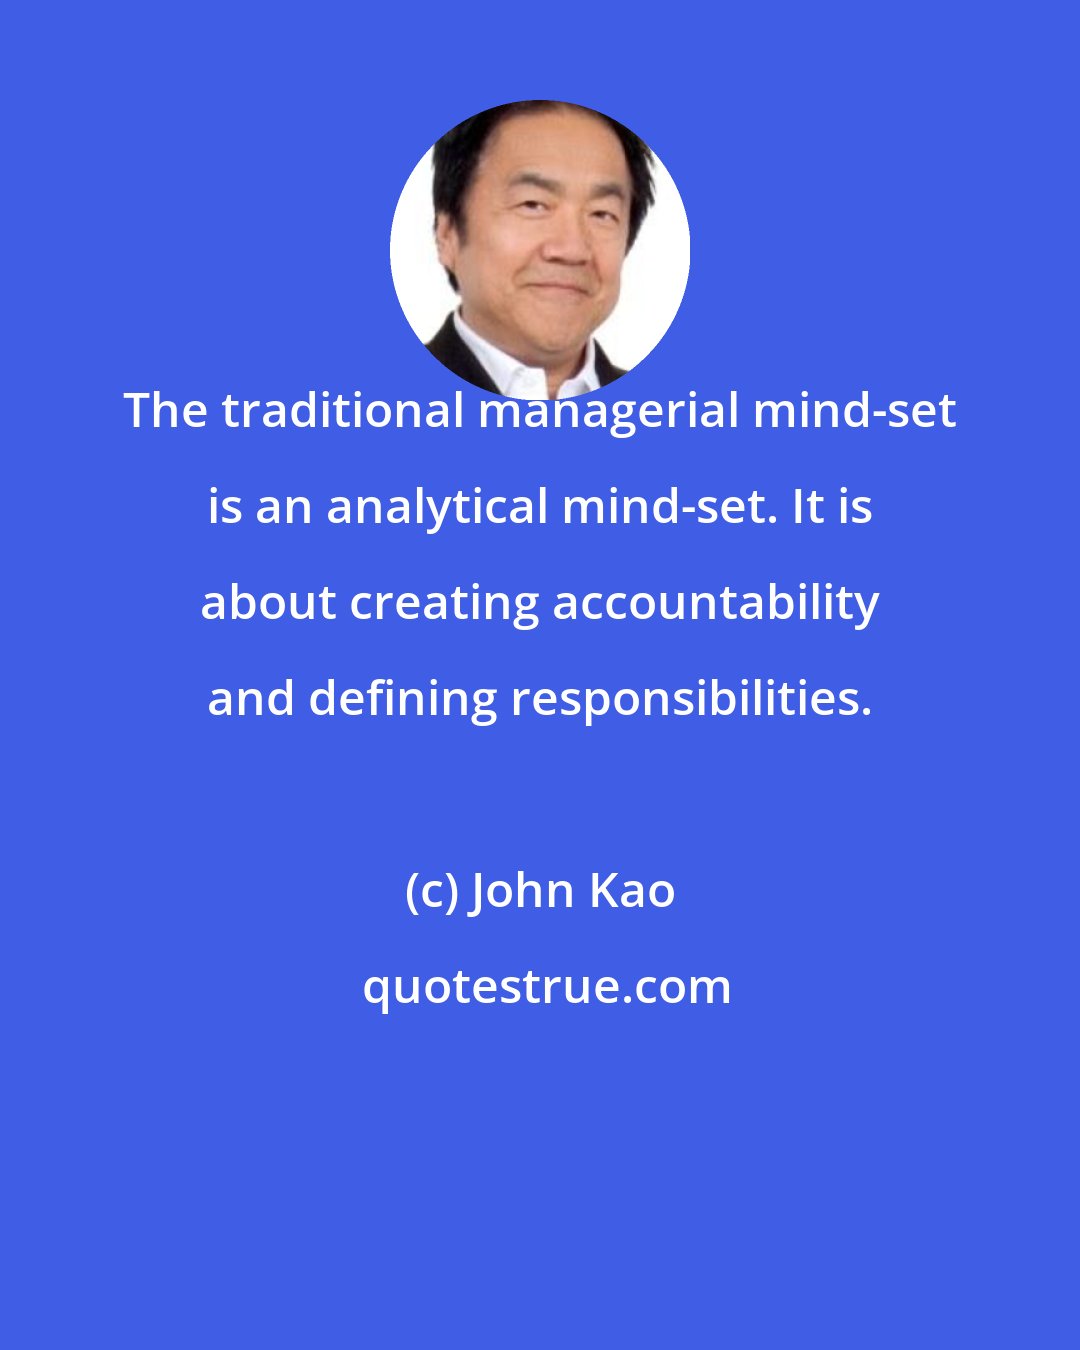 John Kao: The traditional managerial mind-set is an analytical mind-set. It is about creating accountability and defining responsibilities.